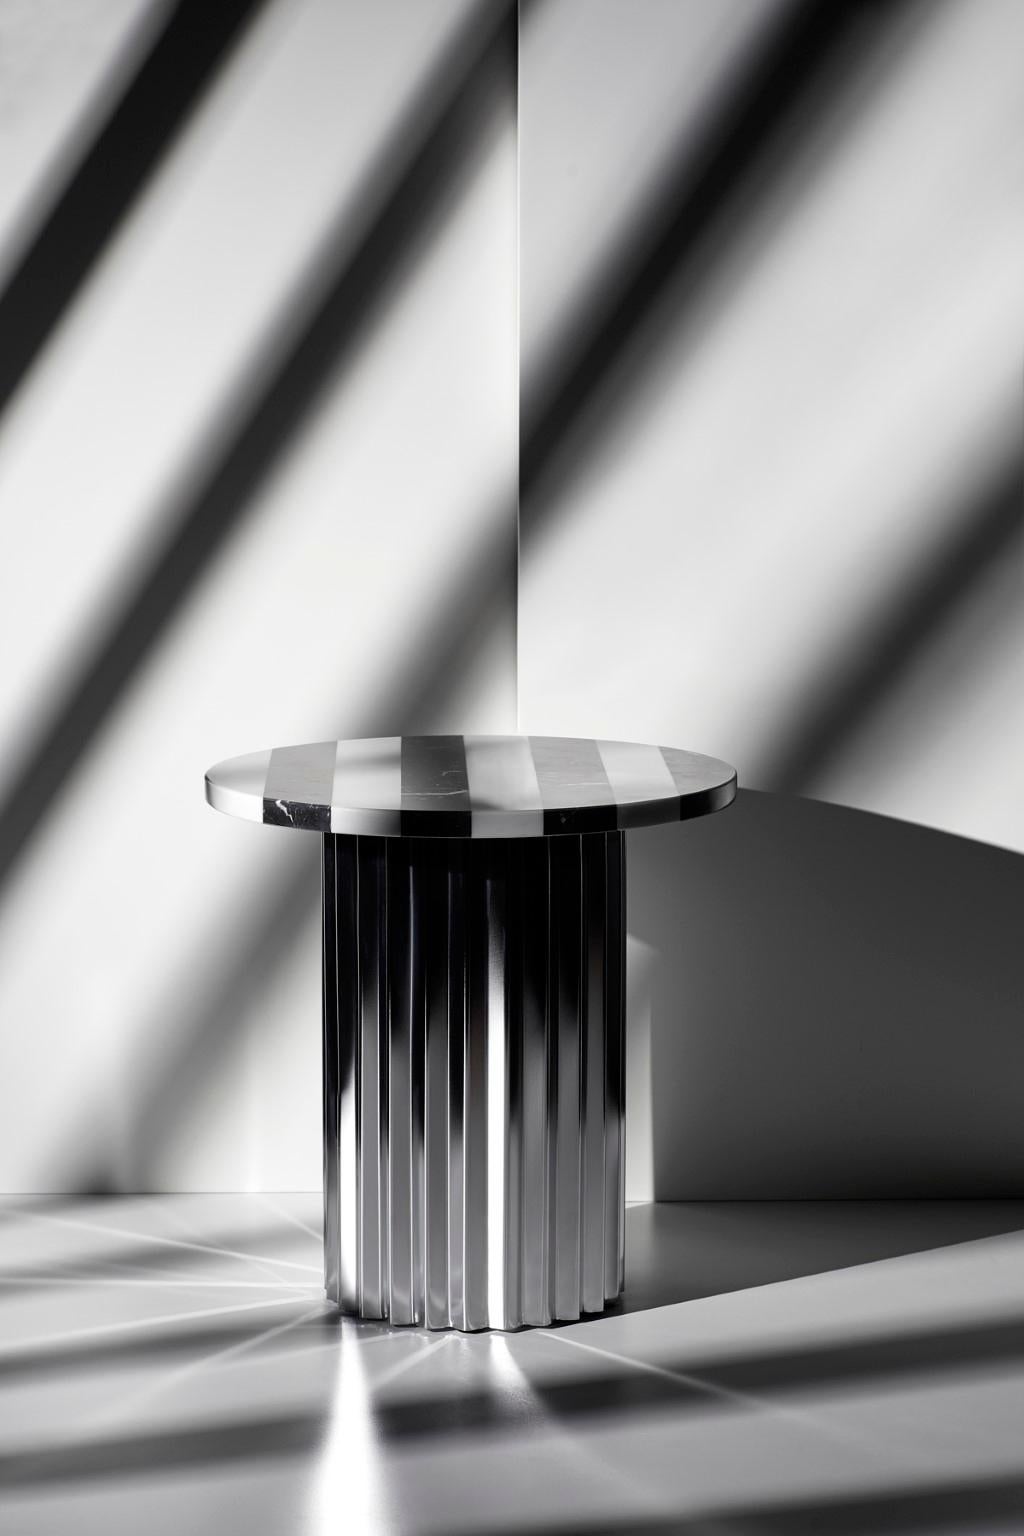 Striped marble table 60 by Lisette Rützou.
Dimensions: D 60 x H 41 cm
Materials: Steel, Marble tabletop
Also available Ø 40

 Lisette Rützou’s design is motivated by an urge to articulate a story. Inspired by the beauty of materials, form and